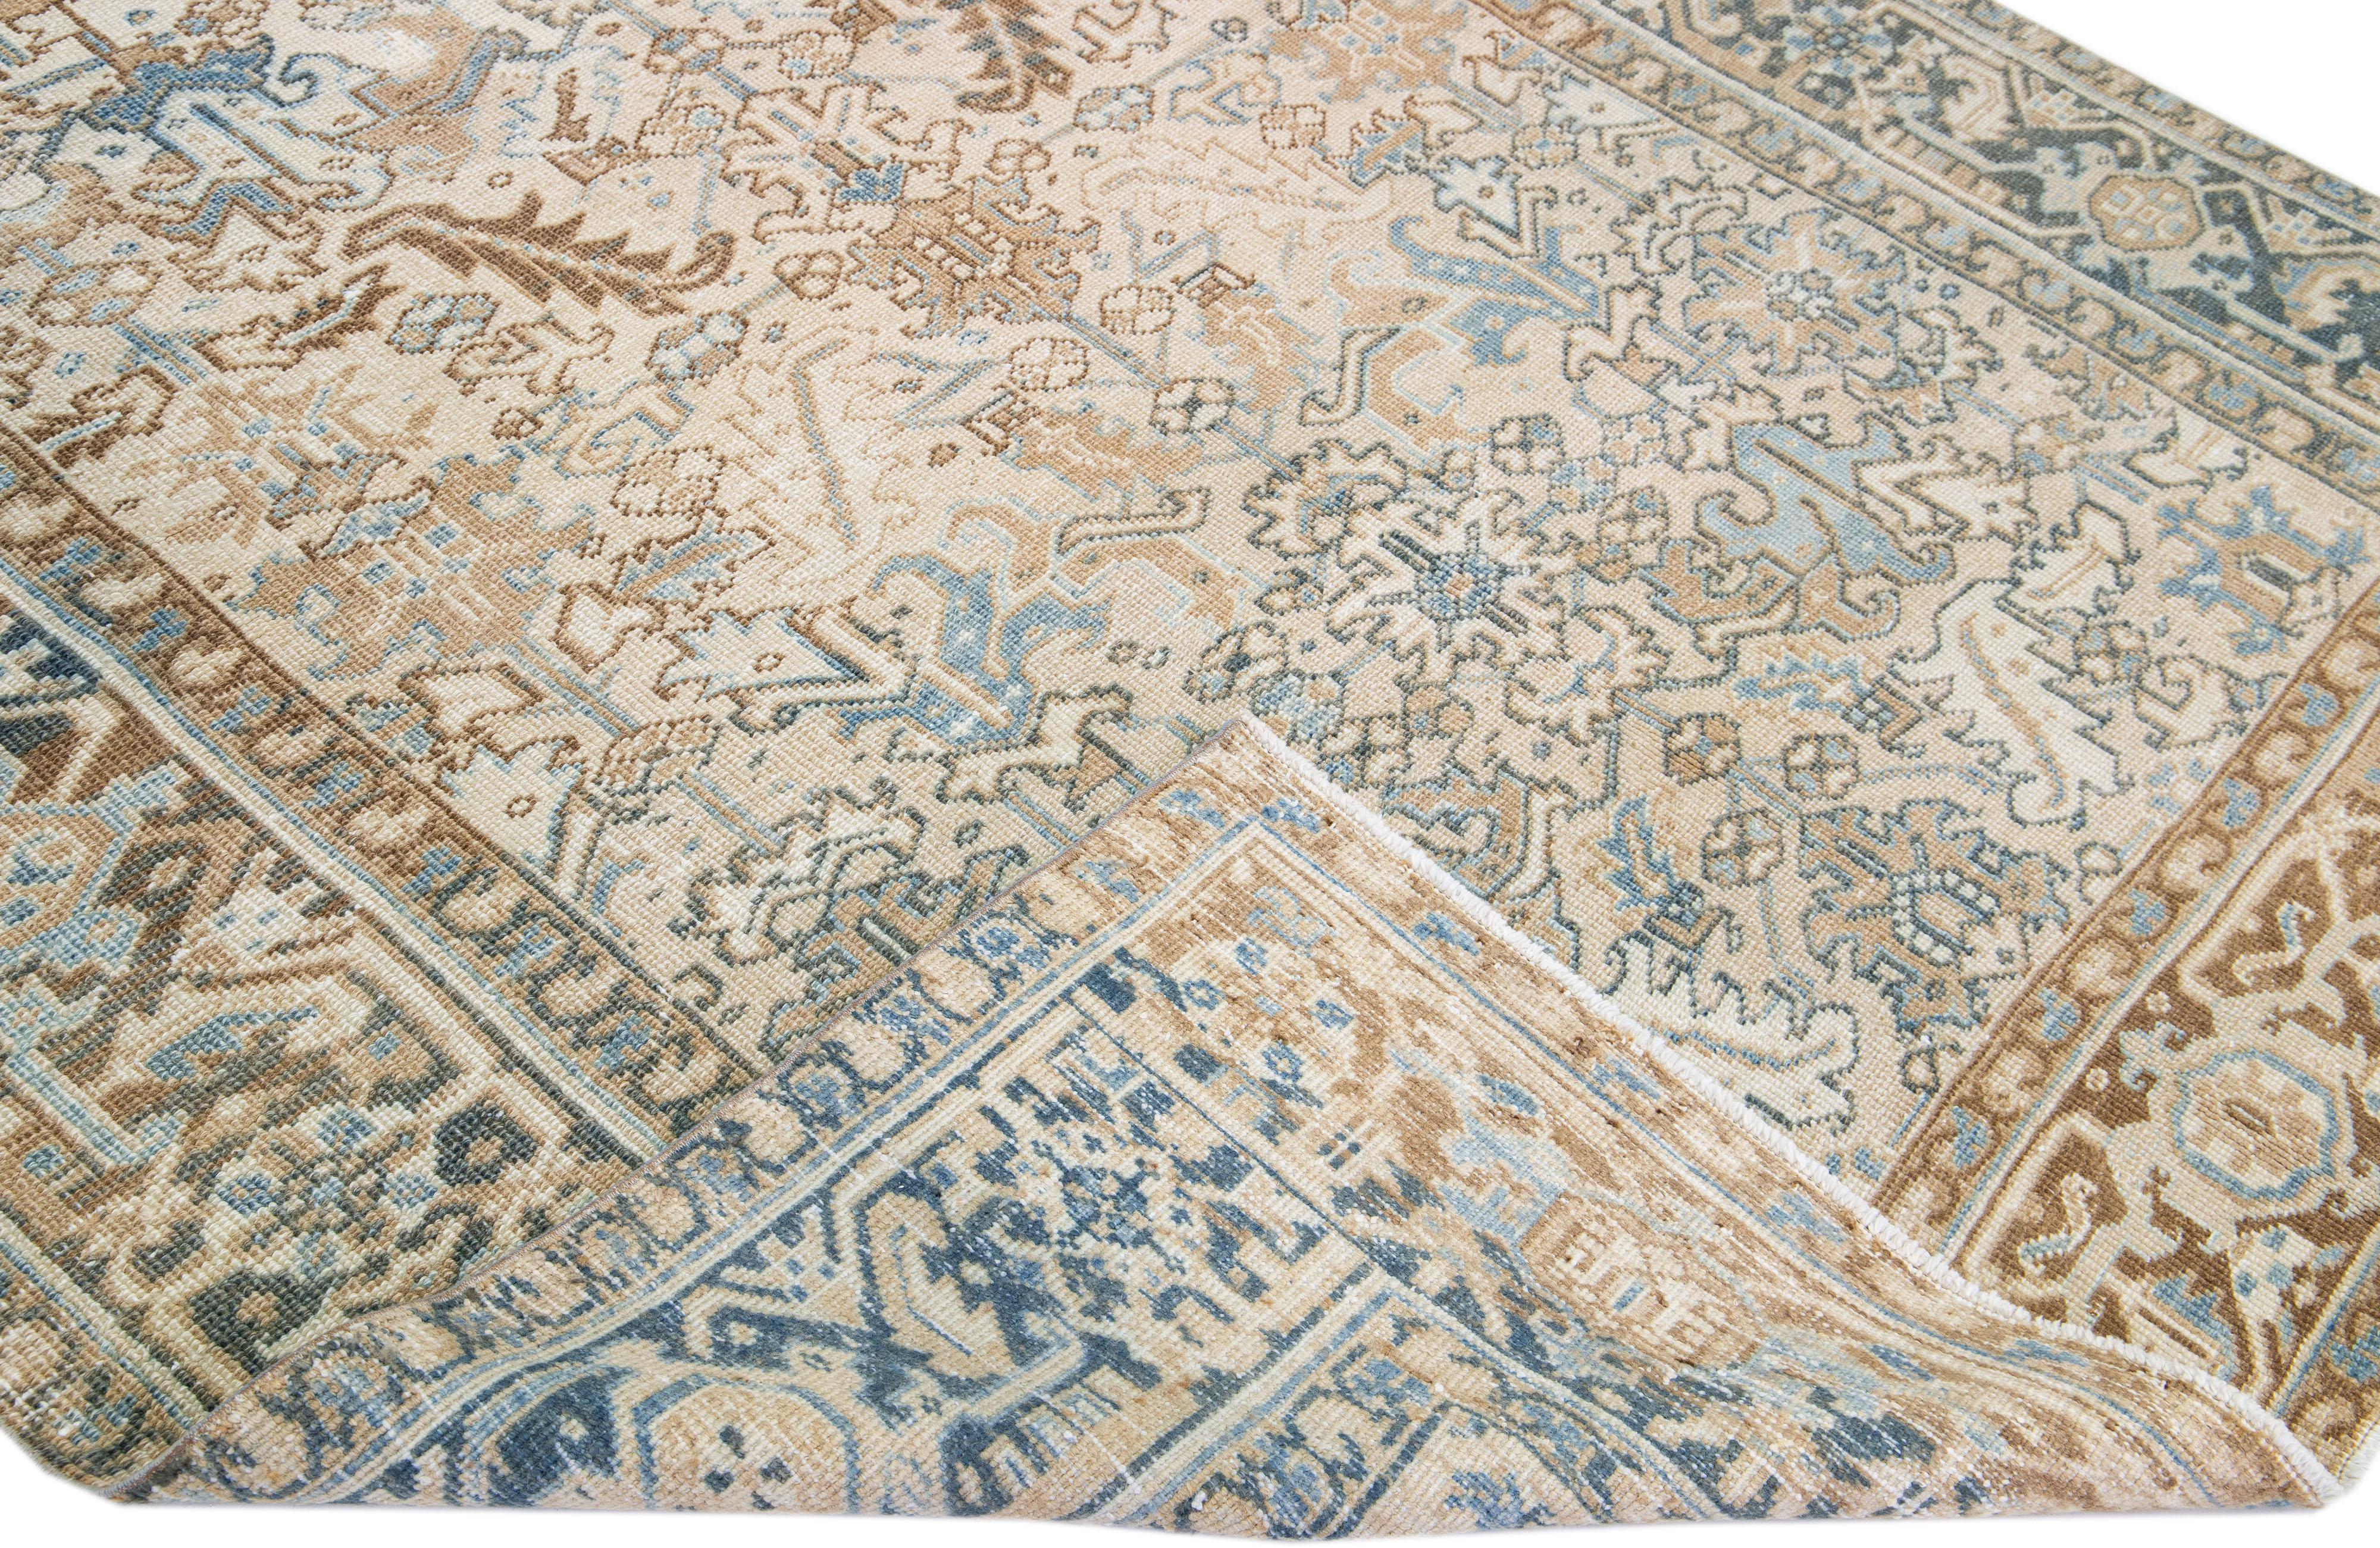 Beautiful antique Heriz hand-knotted wool rug with a beige color field. This Persian rug has a blue frame and accents in a gorgeous all-over geometric floral design.

This rug measures: 7' x 8'9